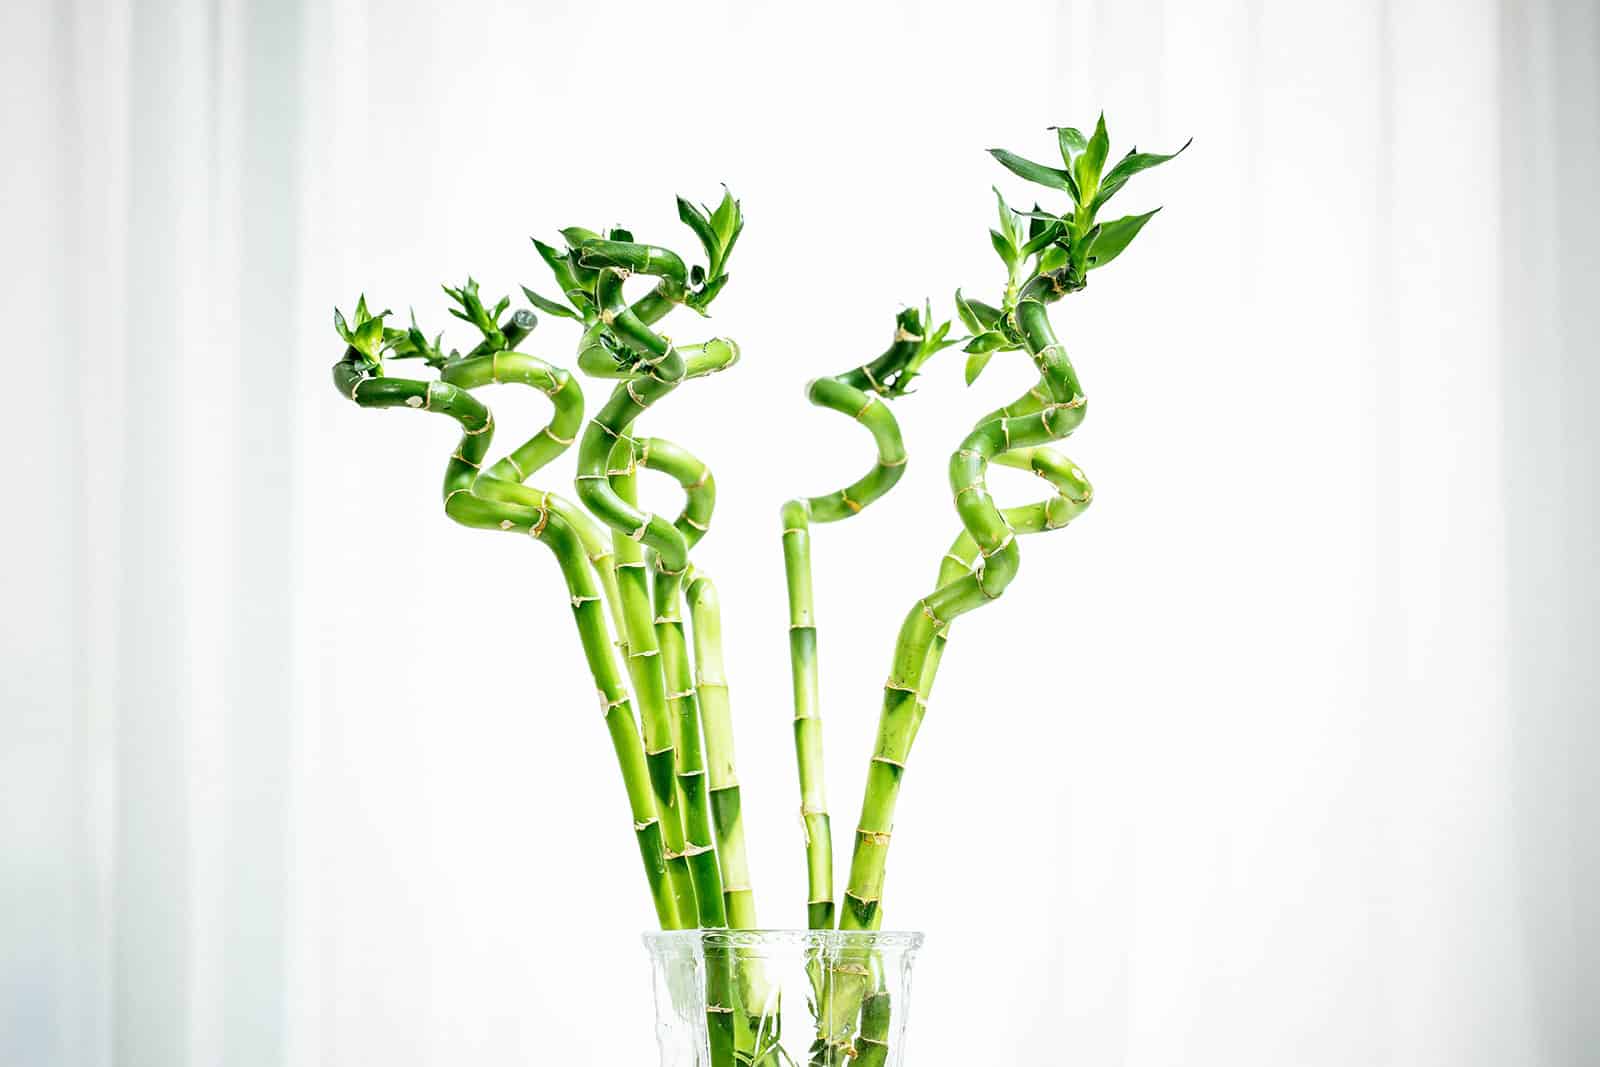 Curled lucky bamboo stems in a clear vase against white curtains